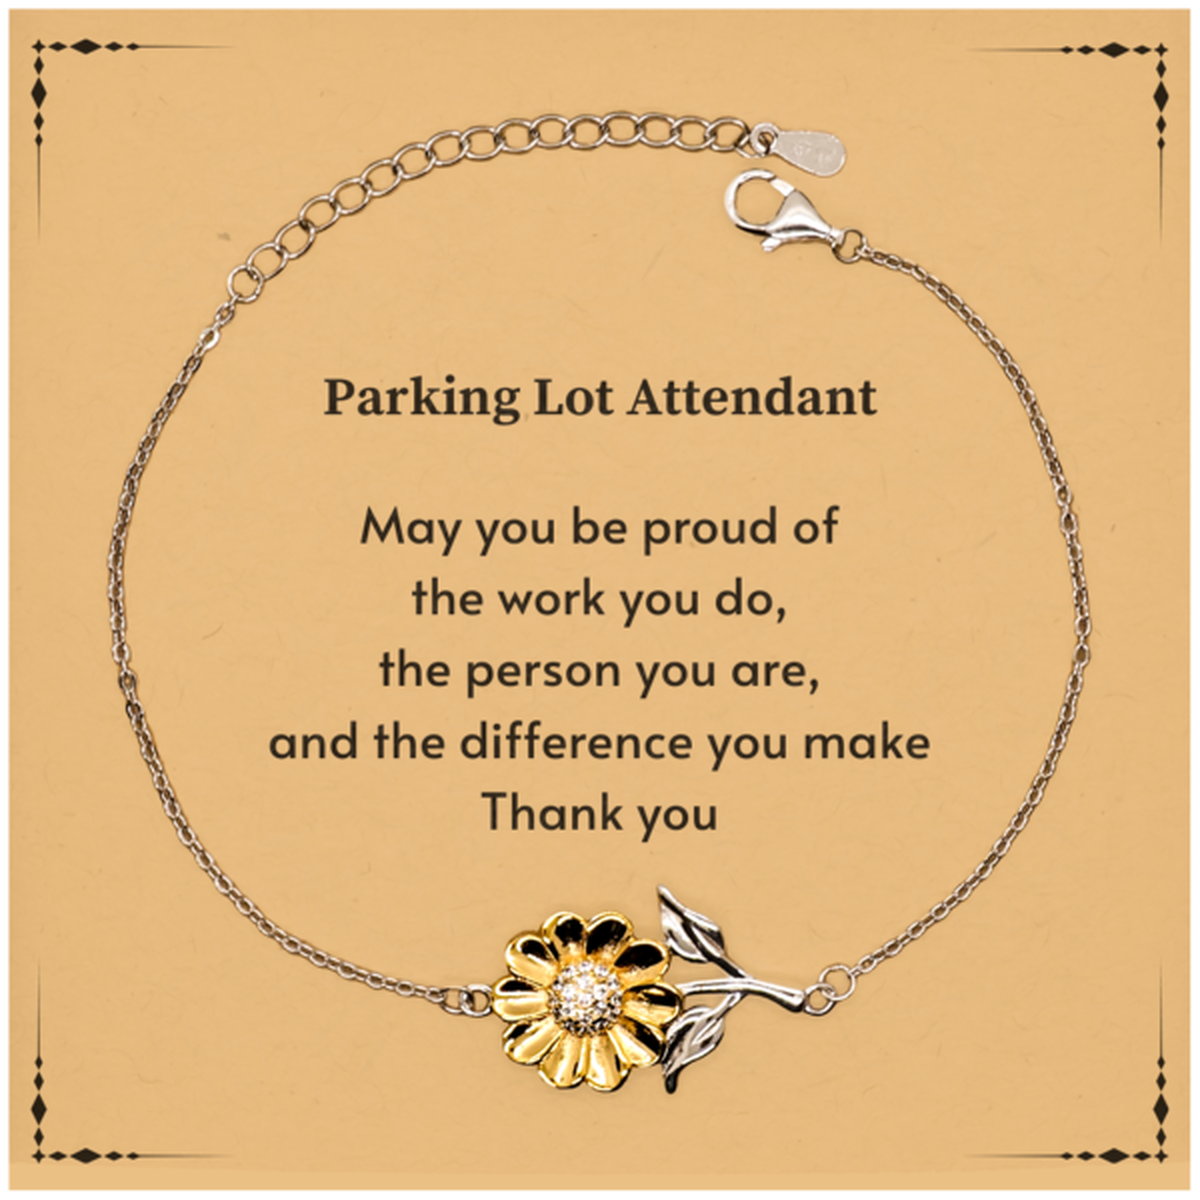 Heartwarming Sunflower Bracelet Retirement Coworkers Gifts for Parking Lot Attendant, Parking Lot Attendant May You be proud of the work you do, the person you are Gifts for Boss Men Women Friends